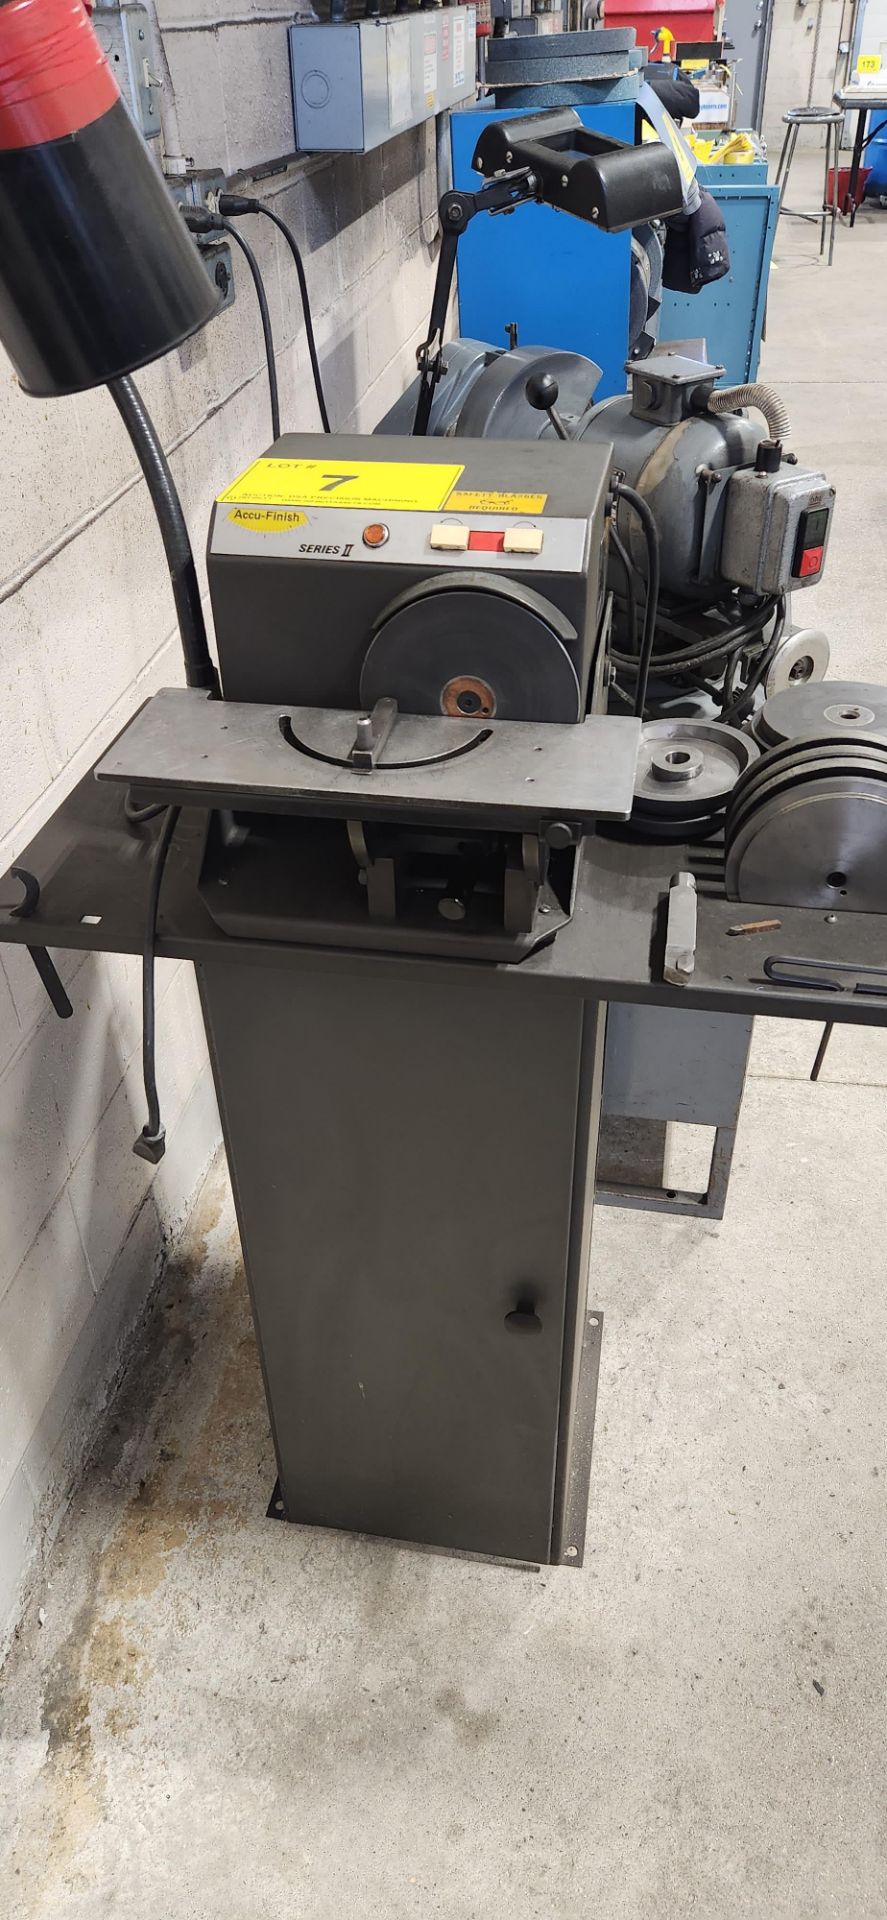 ACCU-FINISH SERIES II TOOL CUTTER GRINDER, S/N AB29611 (RIGGING FEE $50) - Image 2 of 6